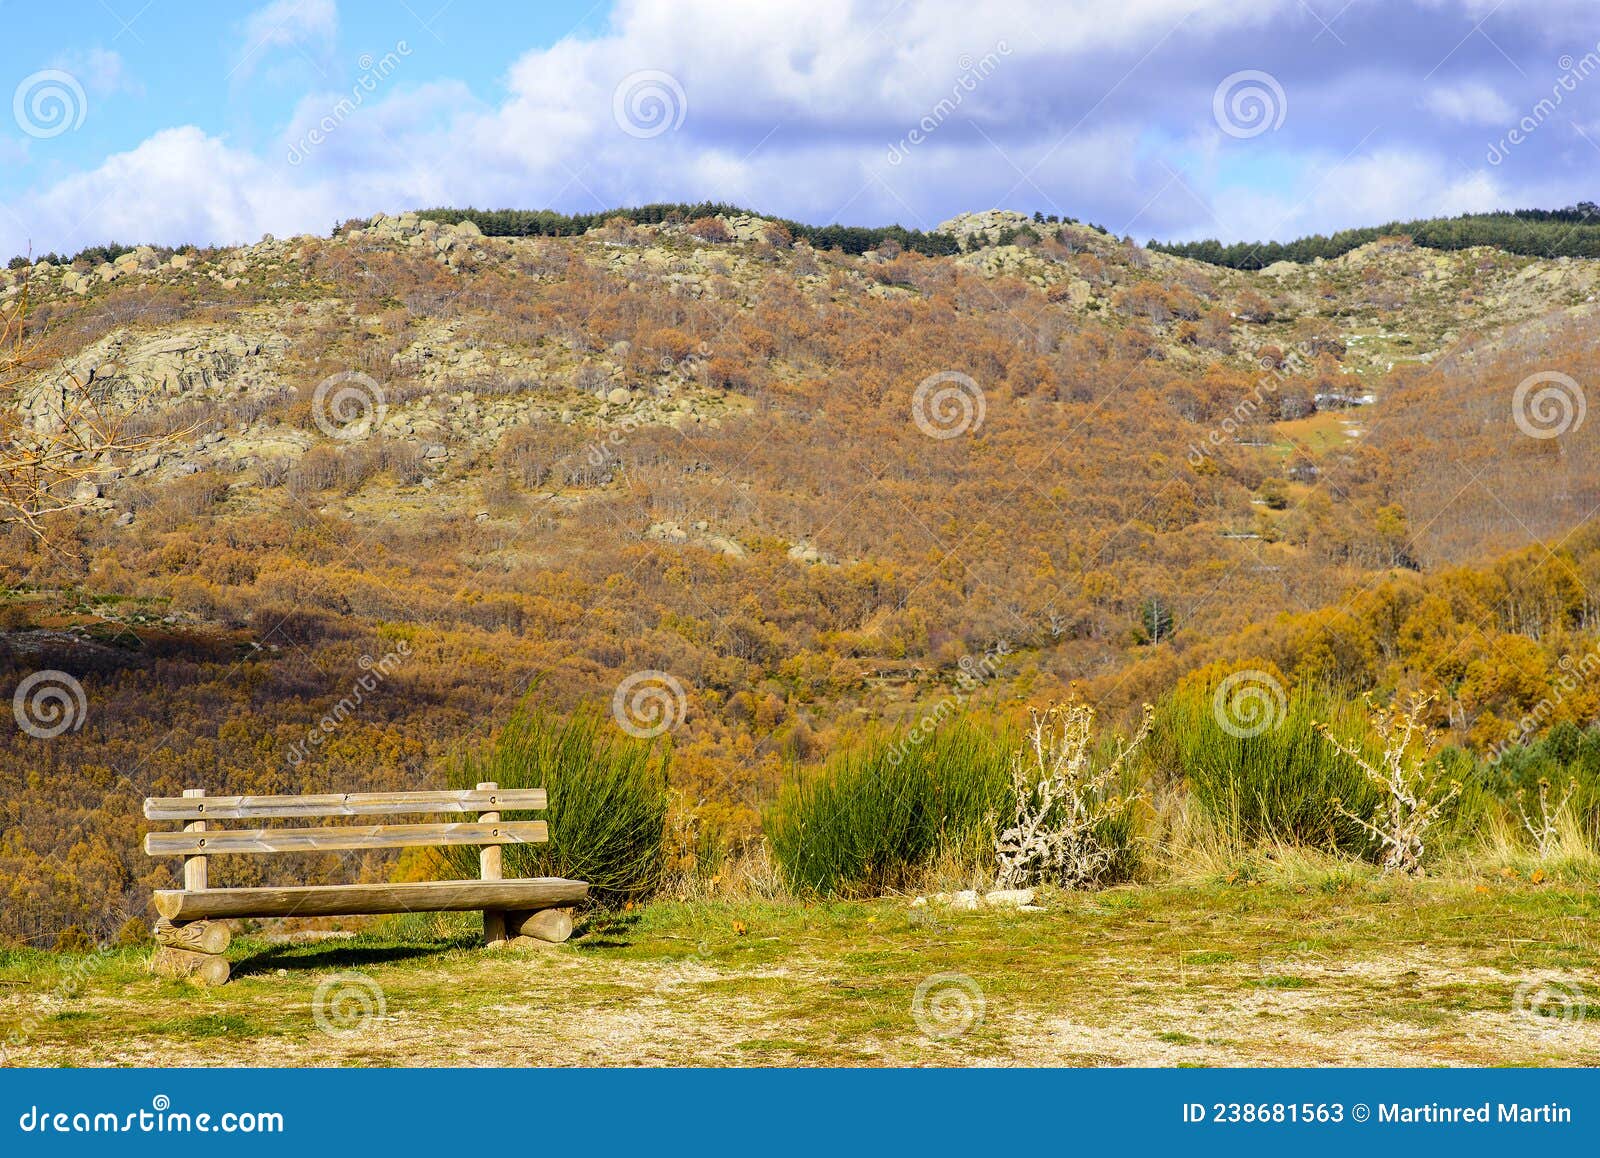 wooden bench and chestnut trees in autumn in the mountain of hervas, extremadura